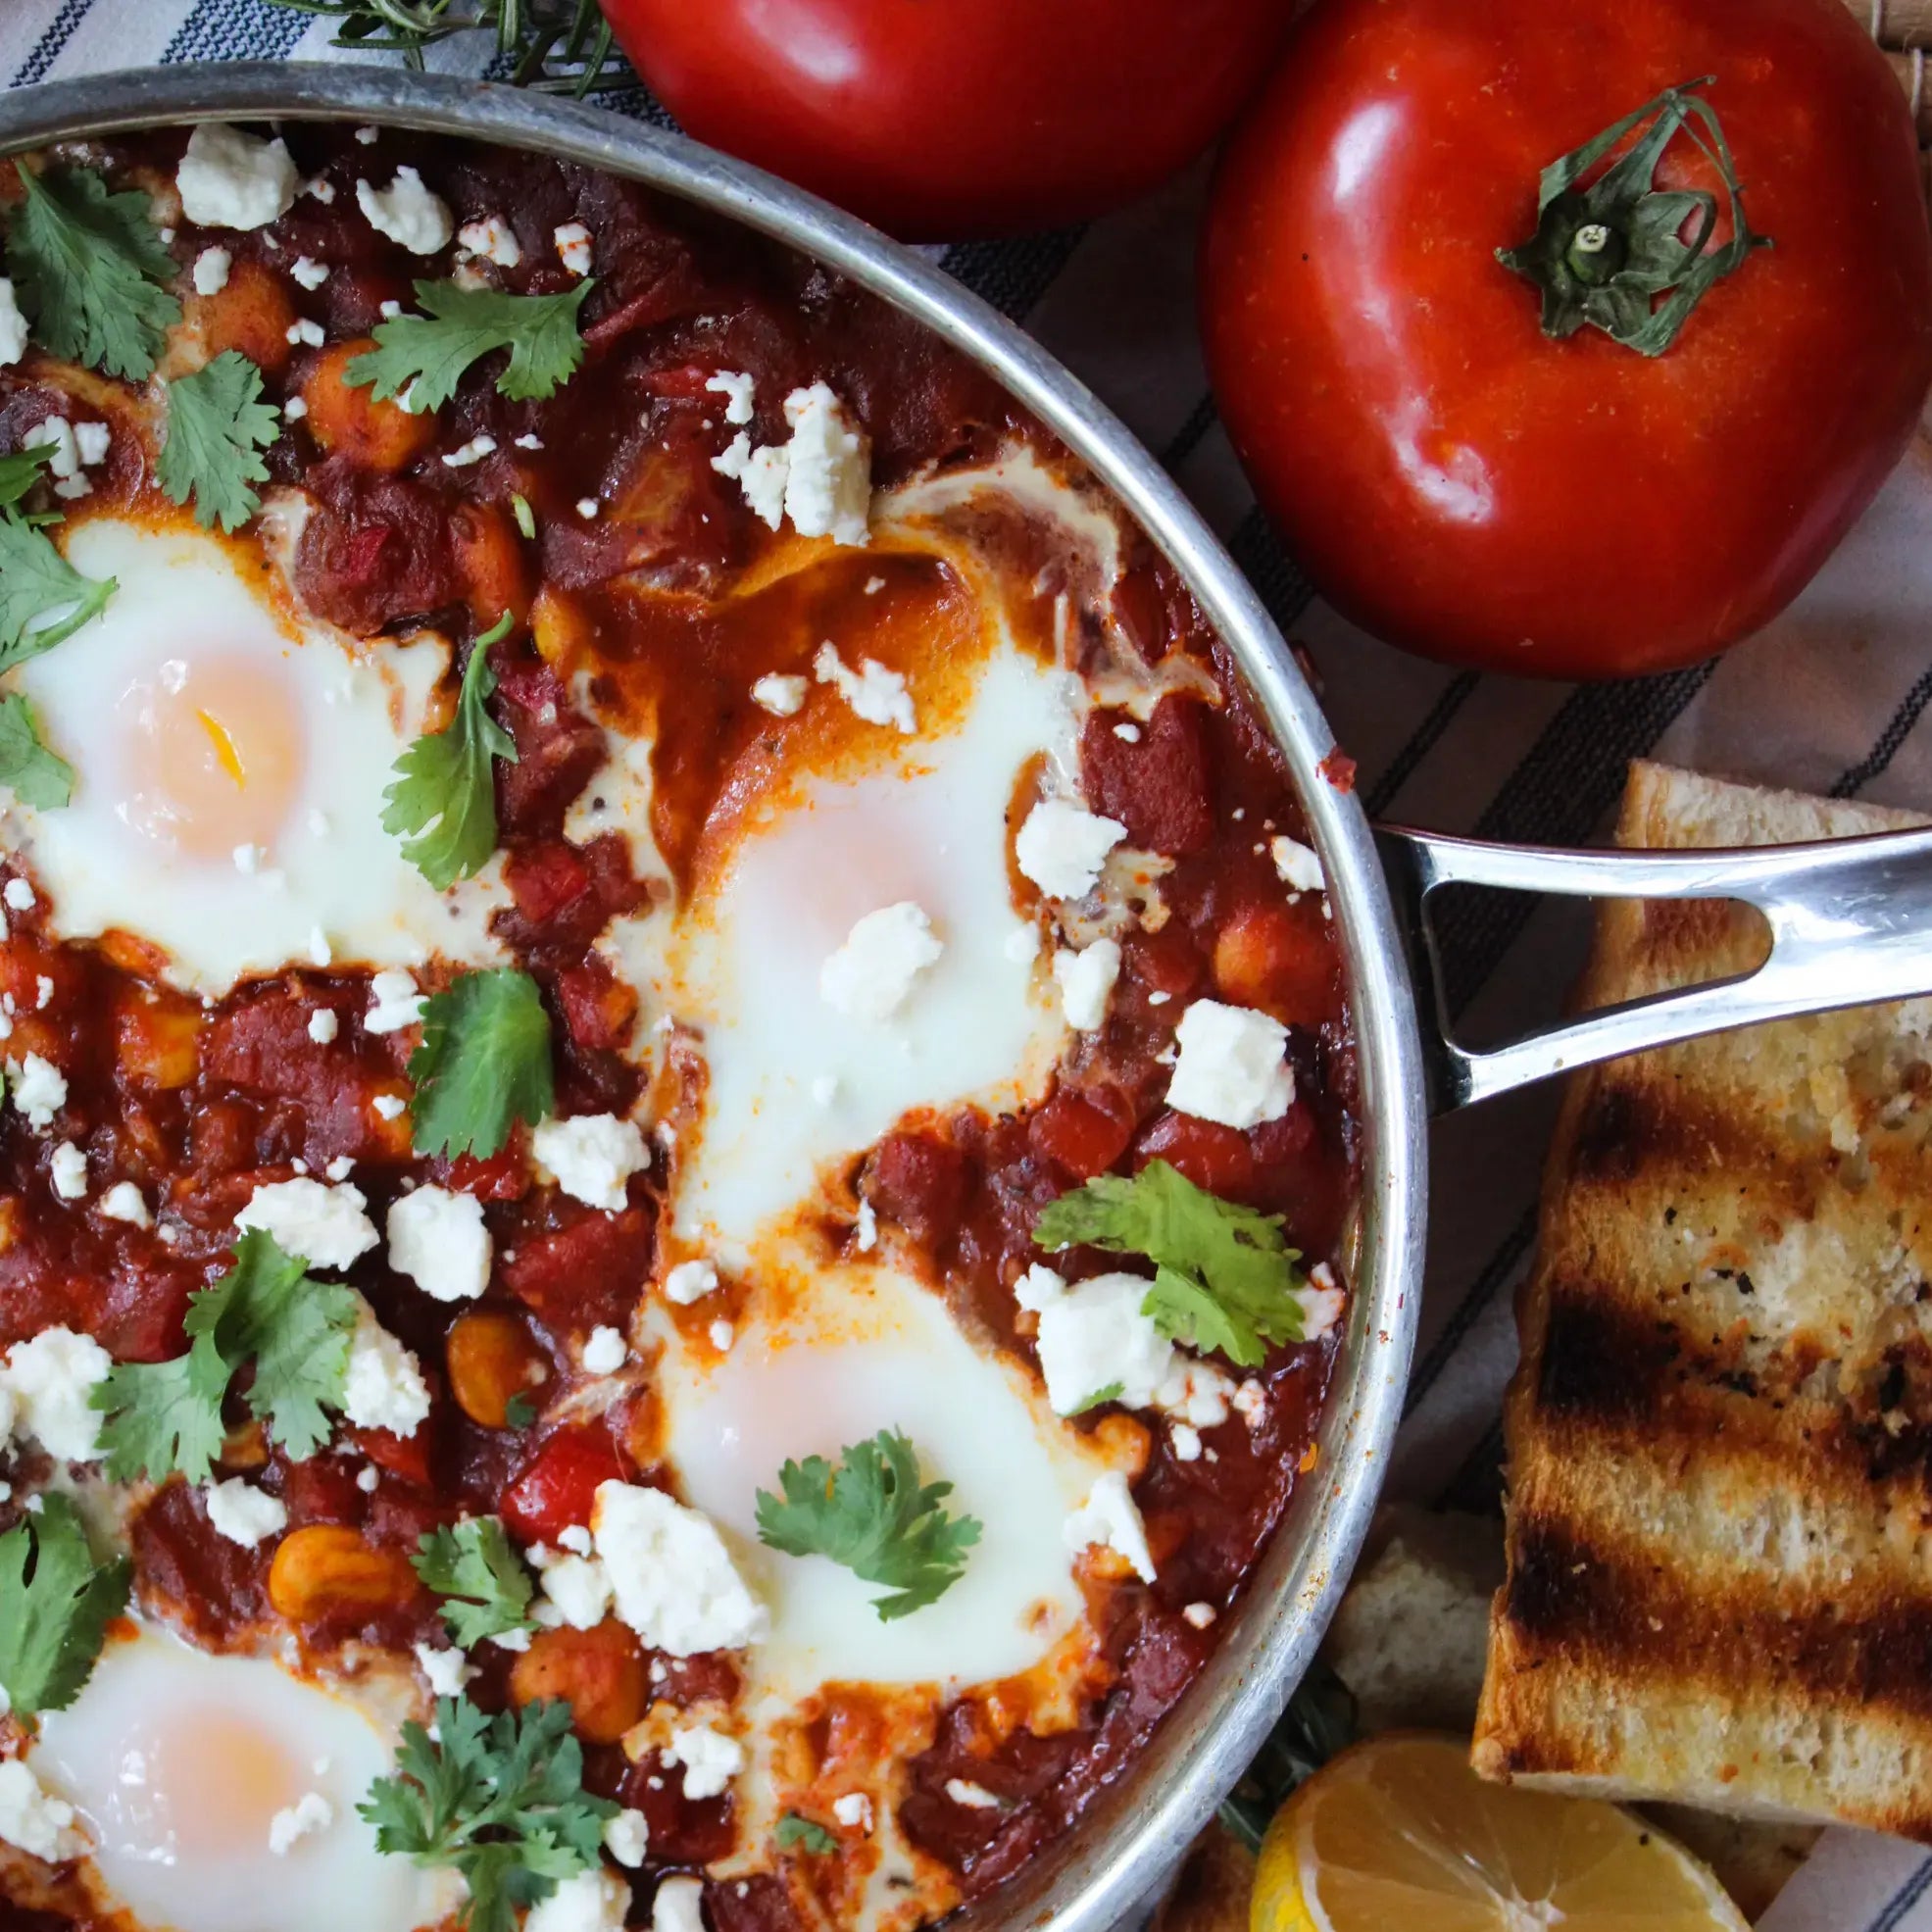 SPICY SHAKSHUKA WITH LUPINI BEANS